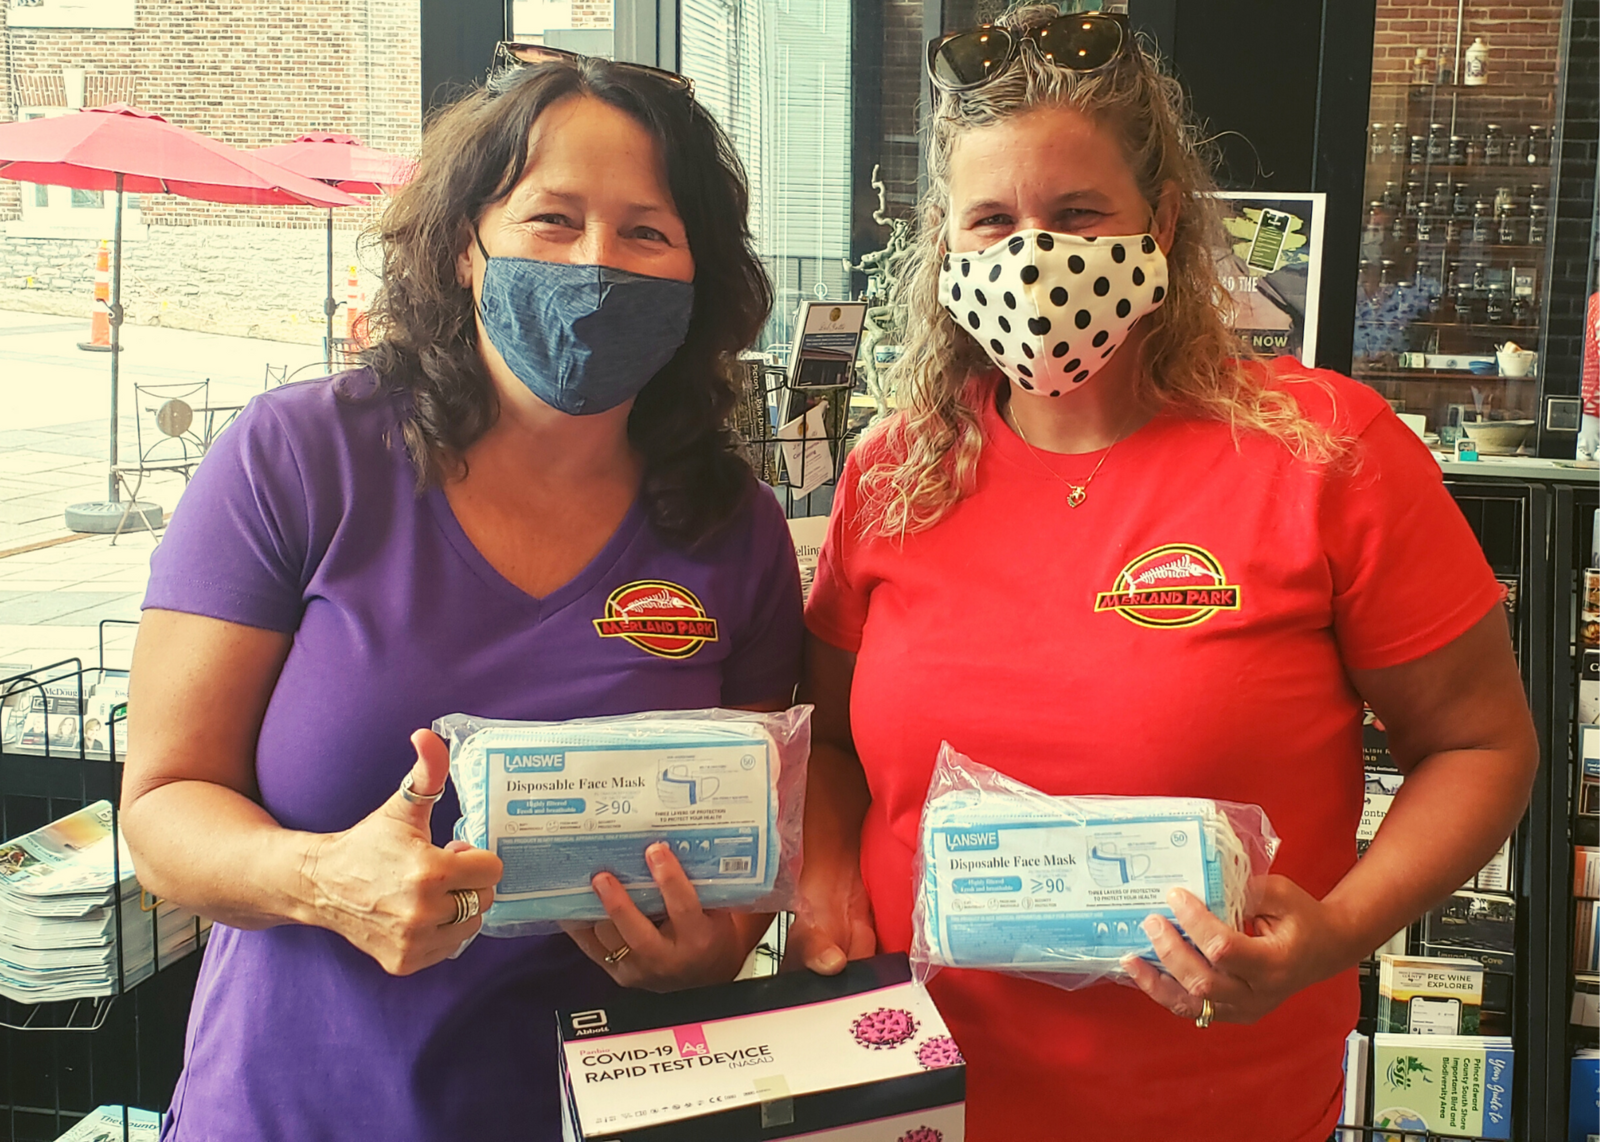 Two staff members from Merland Park holding up masks and rapid test kits and giving the thumbs up